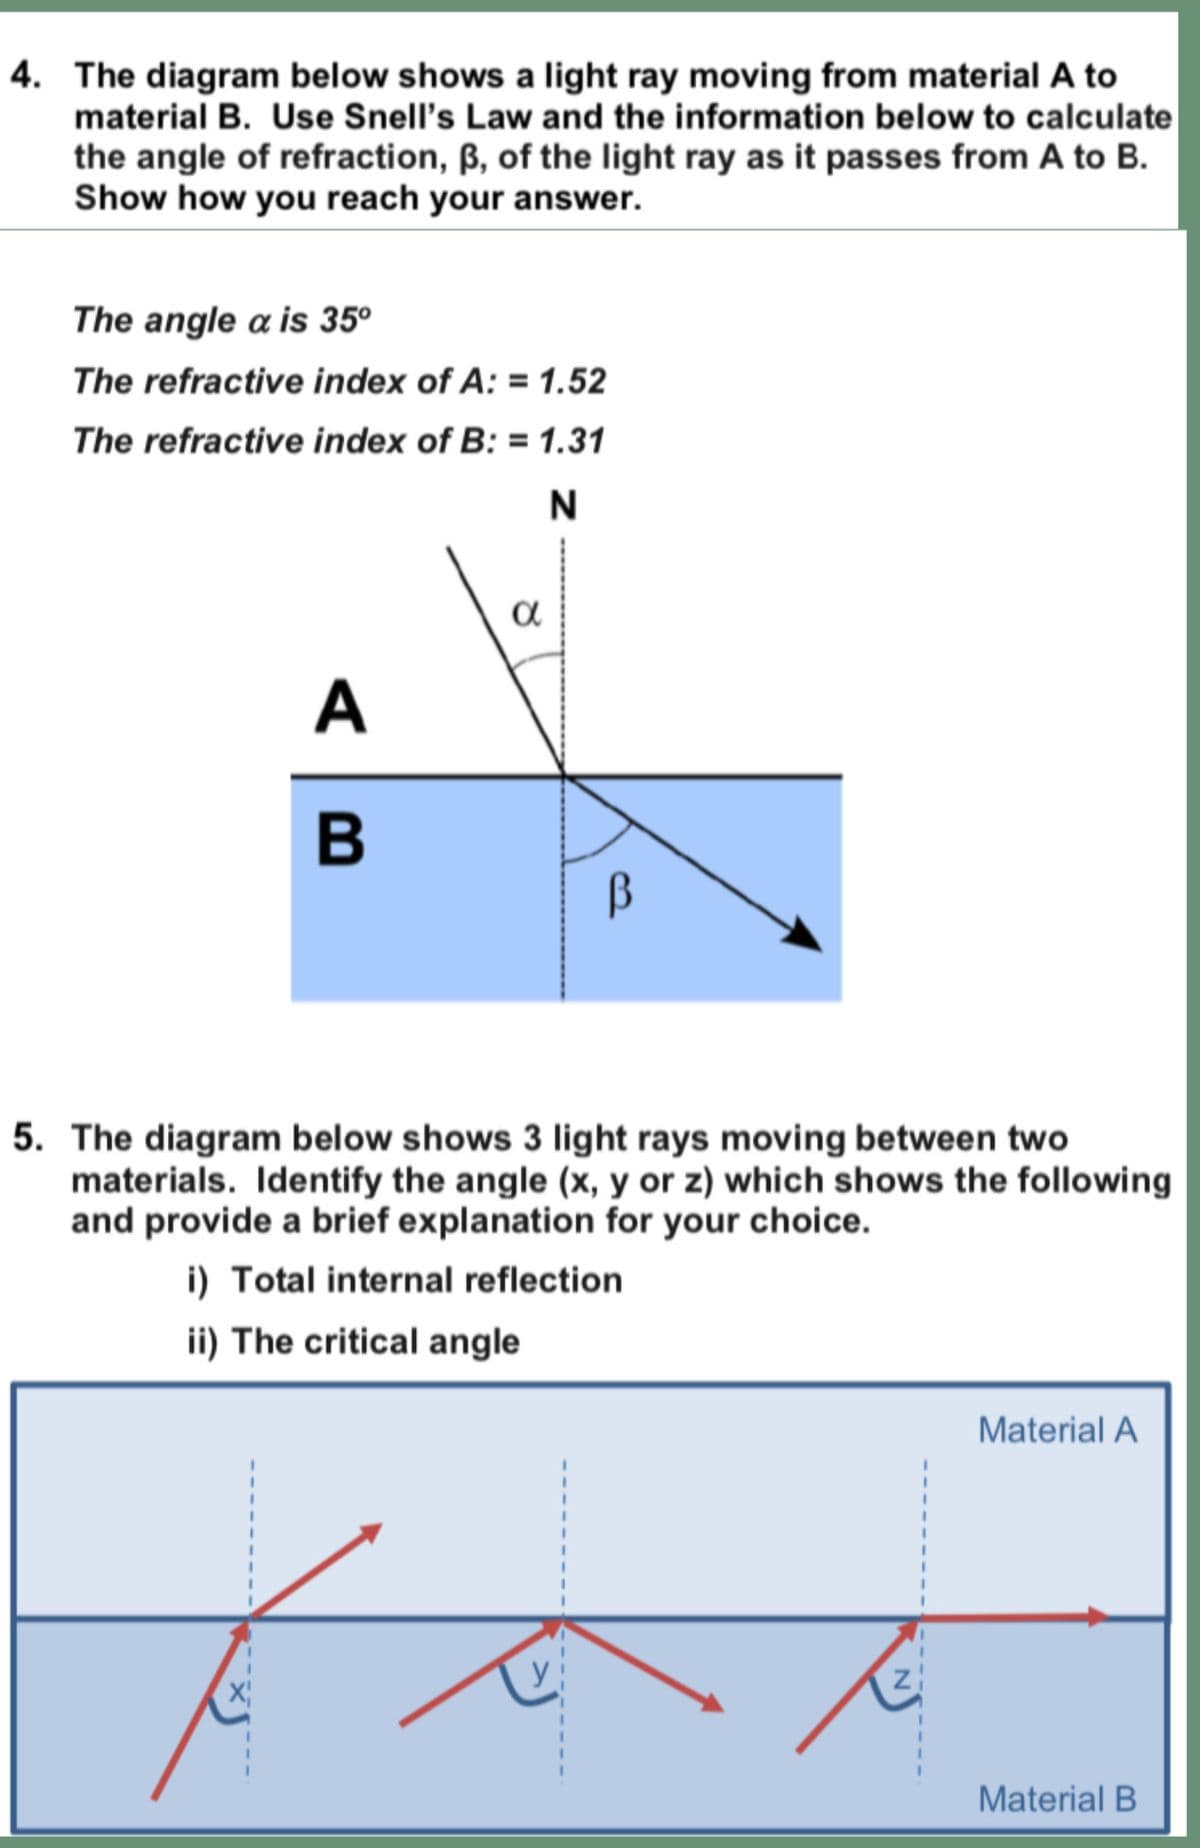 4. The diagram below shows a light ray moving from material A to
material B. Use Snell's Law and the information below to calculate
the angle of refraction, ẞ, of the light ray as it passes from A to B.
Show how you reach your answer.
The angle a is 35°
The refractive index of A: = 1.52
The refractive index of B: = 1.31
>>
a
N
B
β
5. The diagram below shows 3 light rays moving between two
materials. Identify the angle (x, y or z) which shows the following
and provide a brief explanation for your choice.
i) Total internal reflection
ii) The critical angle
X
Material A
Material B